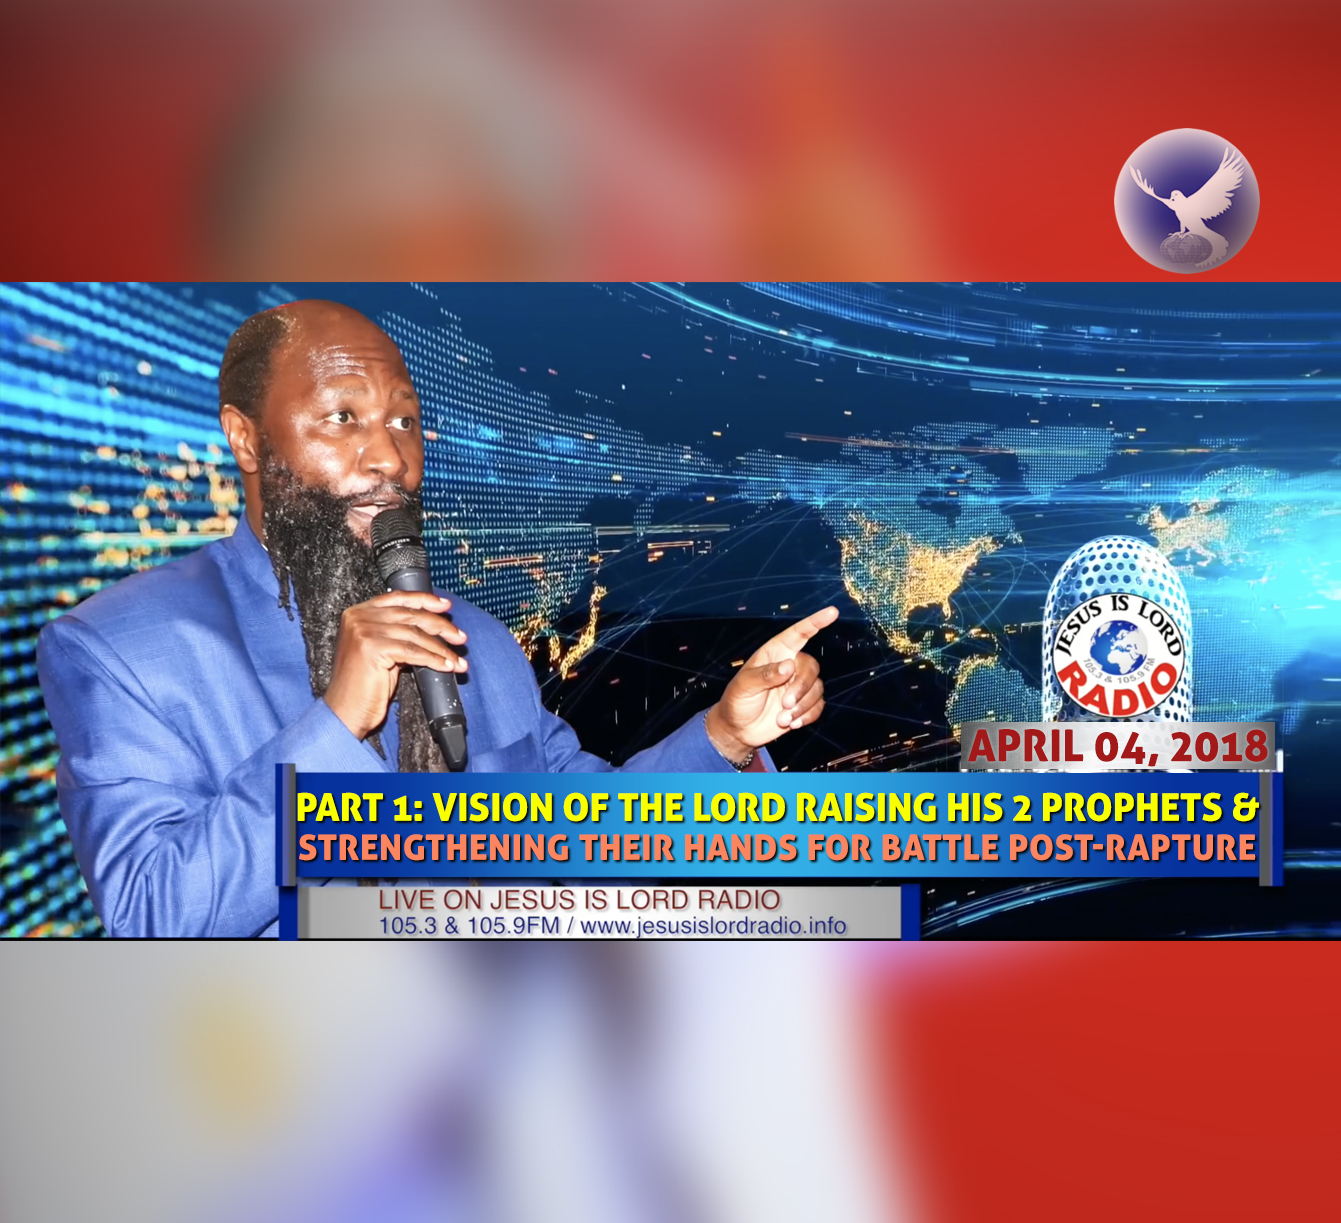 EPISODE 167 - PART 1: VISION OF THE LORD RAISING HIS 2 PROPHETS & STRENGTHENING THEIR HANDS FOR BATTLE POST-RAPTURE (04APR2018) - PROPHET DR. OWUOR